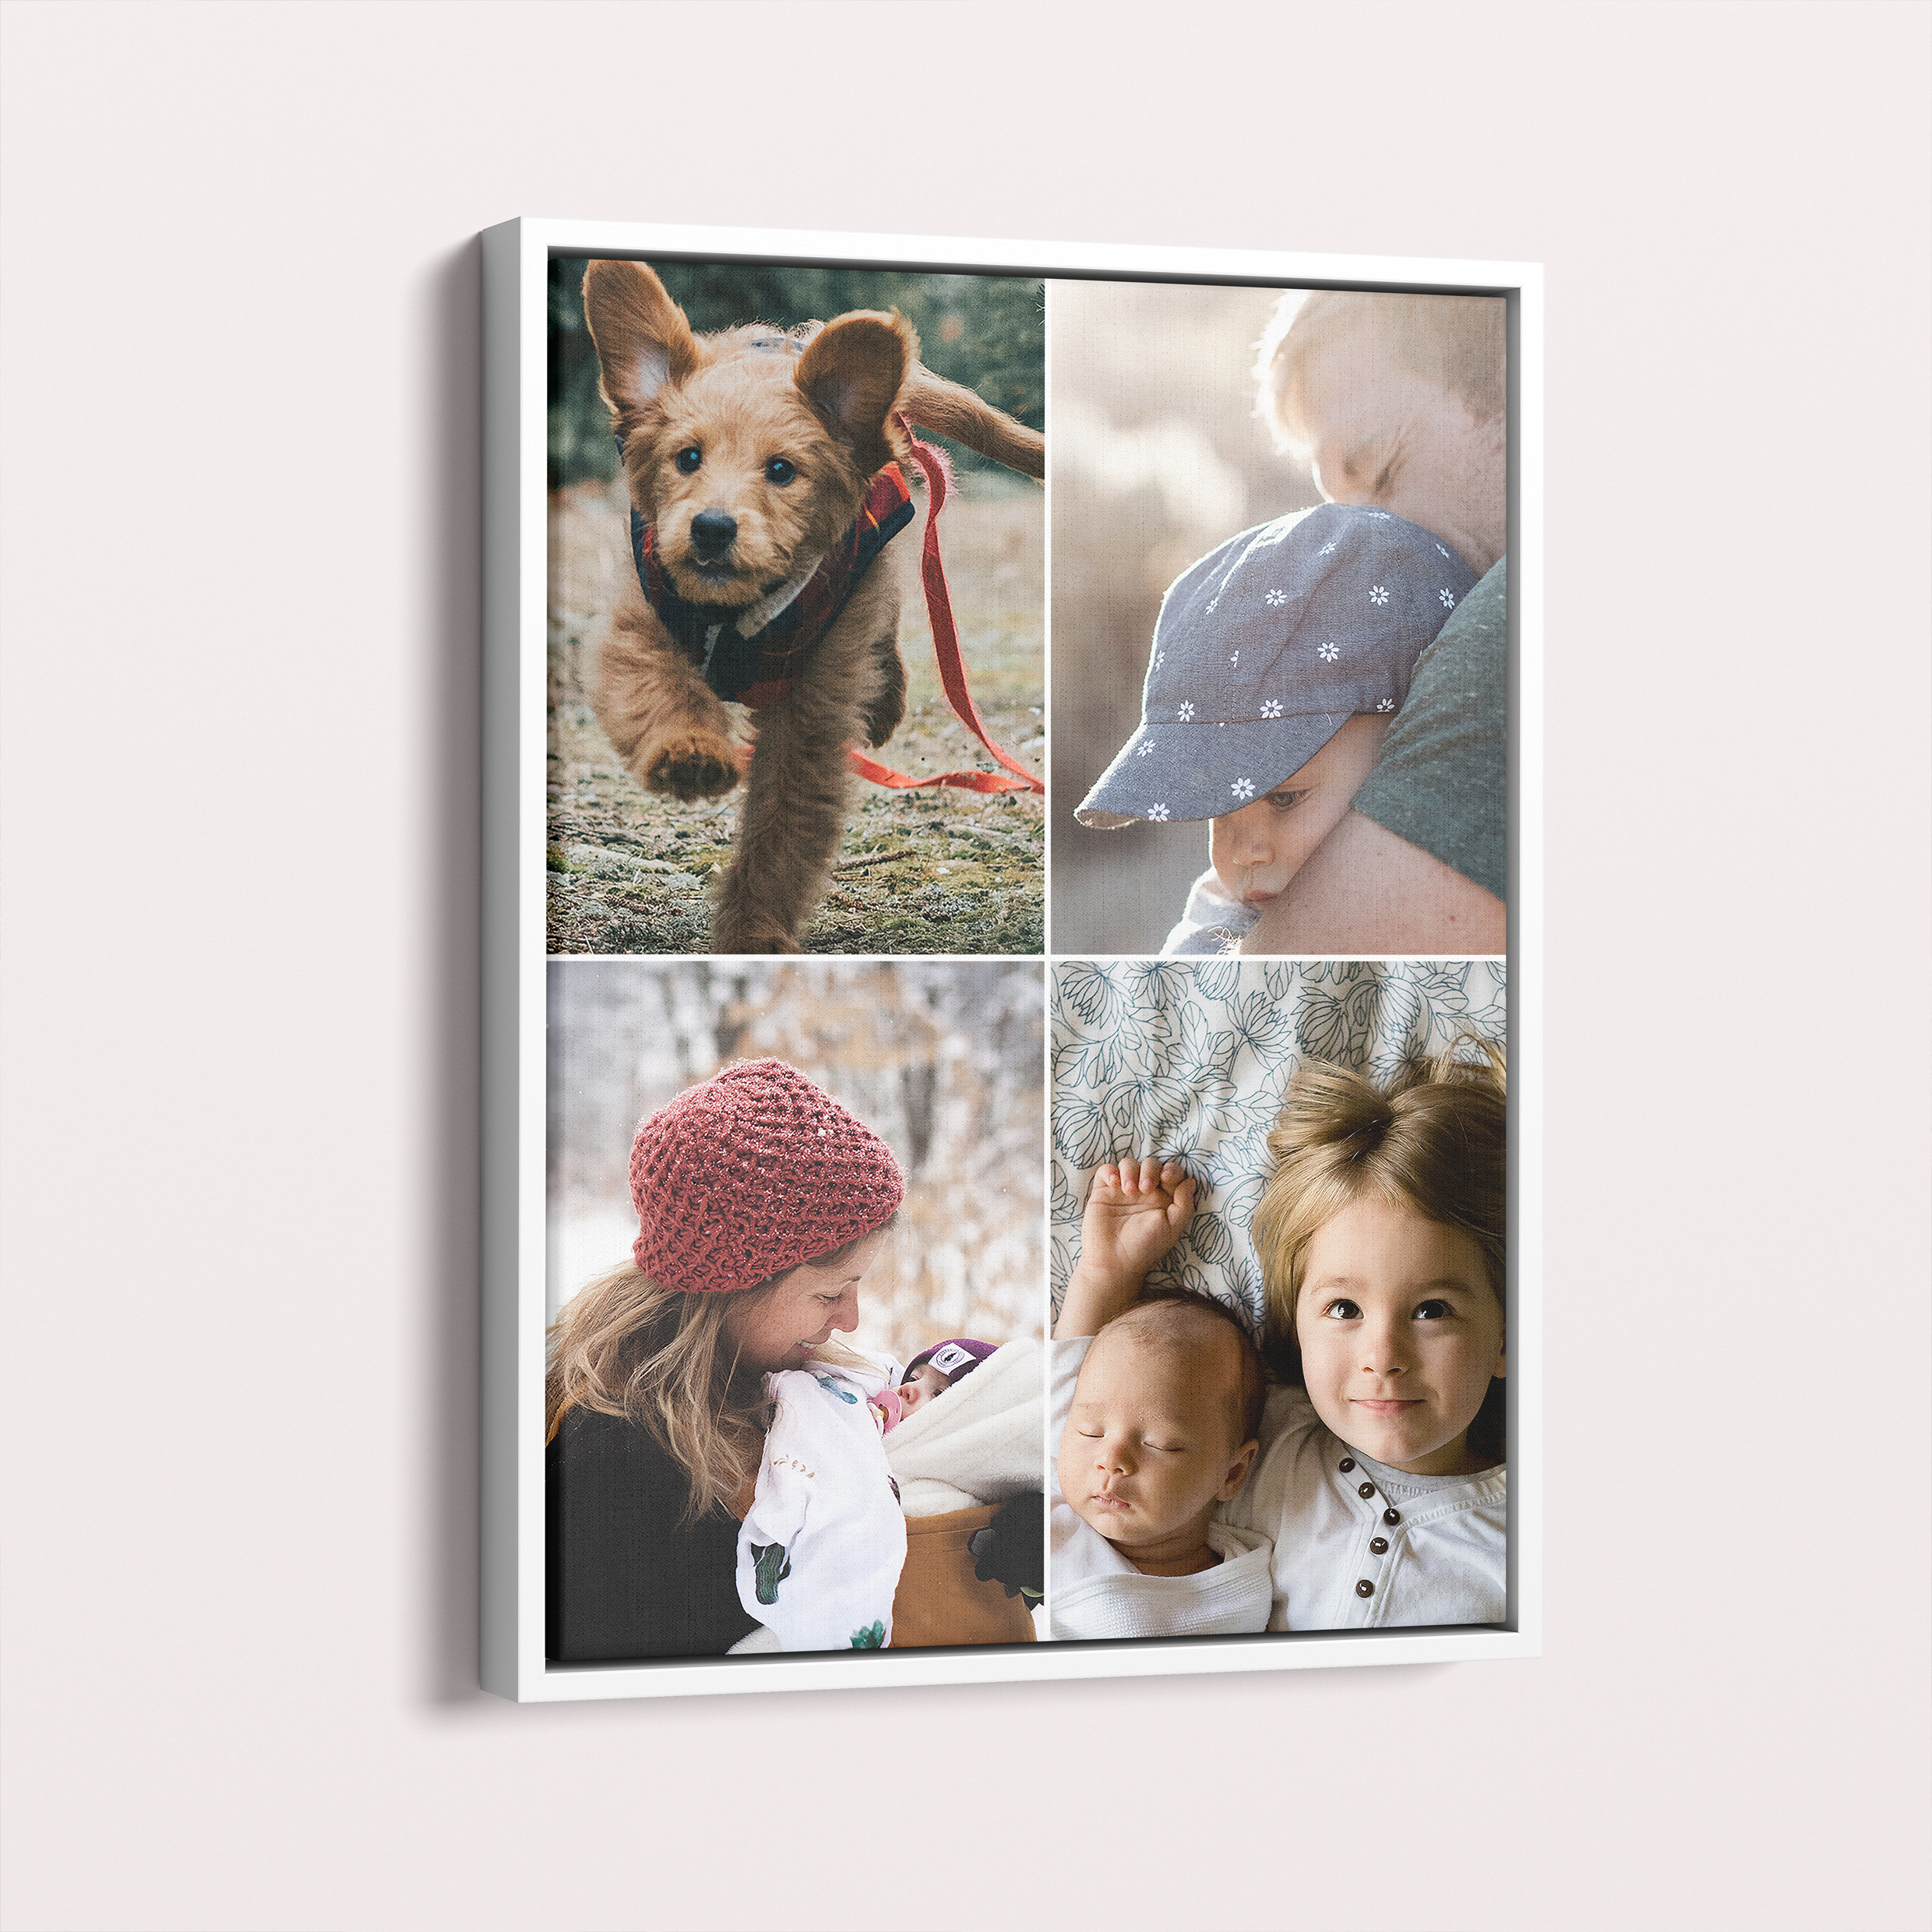 Quad Framed Photo Canvas - Preserve Memories with Four Cherished Photos